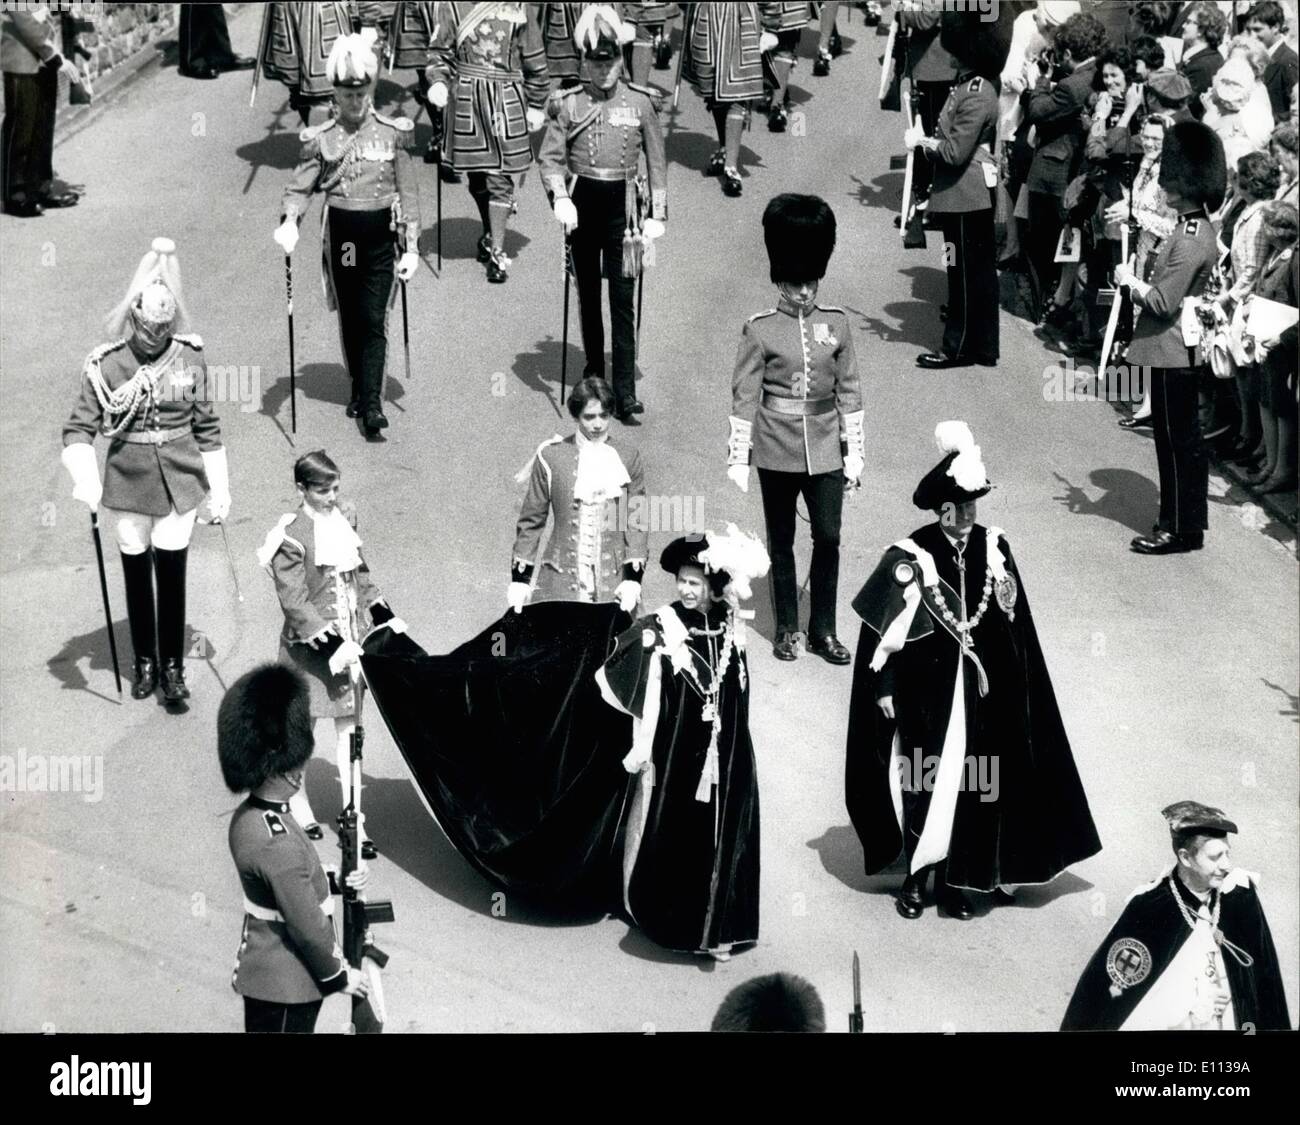 Jul. 07, 1975 - THE CEREMONIAL PROCESSION OF THE MOST NOBLE ORDER OF THE GARTER AT WINDSOR CASTLE The Queen and the Duke of Edinburgh with other members of the Royal Family, today took part in the Ceremonial Order of the Garter ceremony in Windsor Castle. PHOTO SHOWS: W.H. the QUEEN with the DUKE of EDINBURGH walking in procession to St. George's Chapel in Windsor Castle for today;s Garter Service. Stock Photo